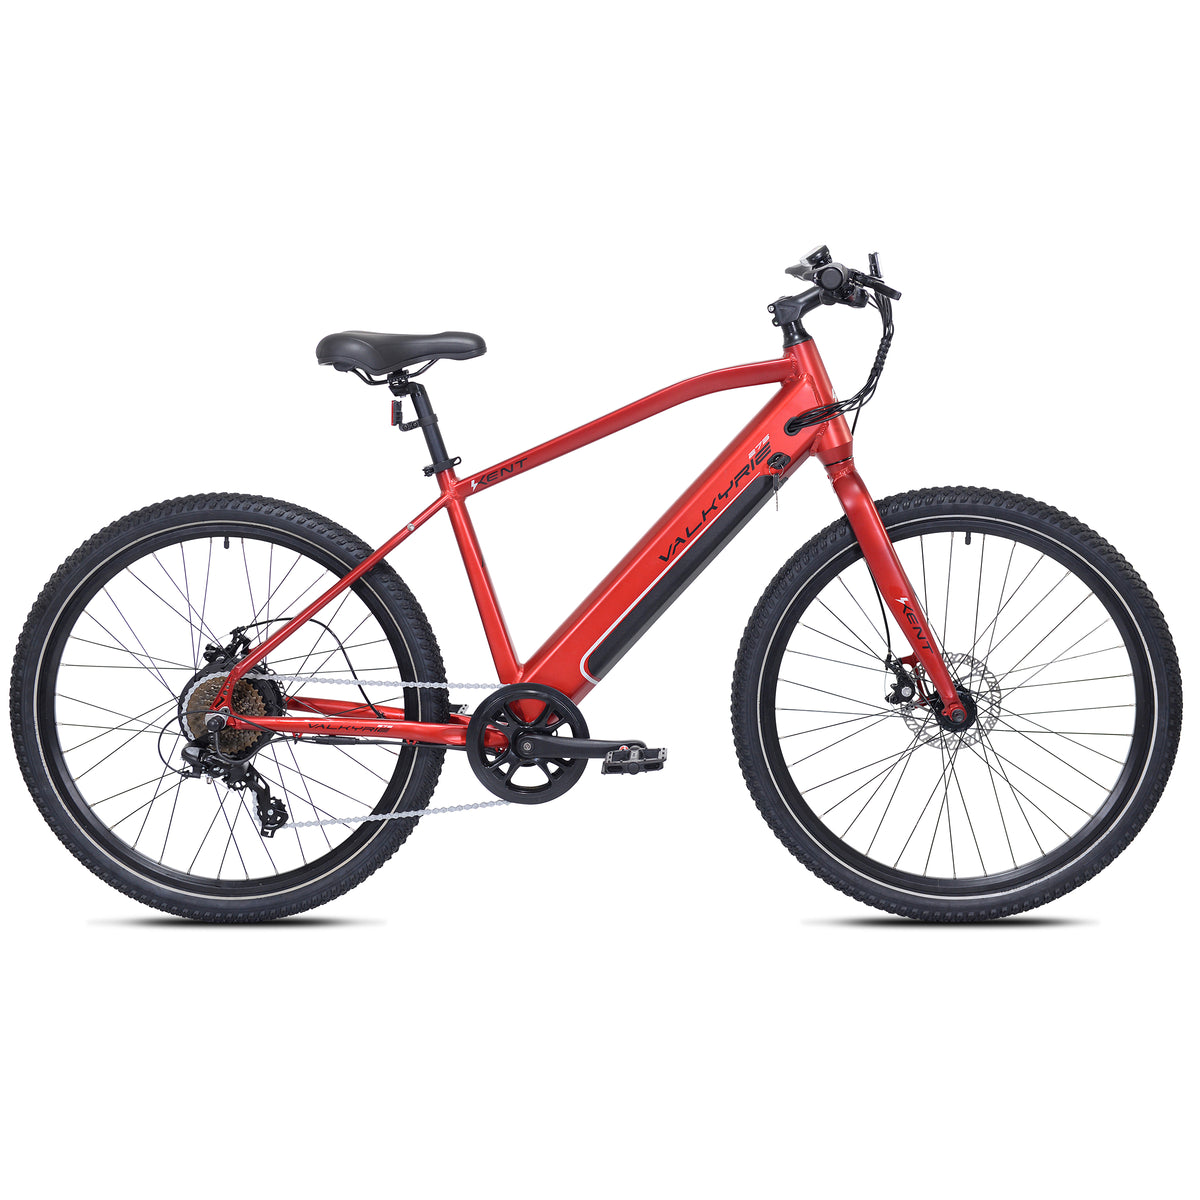 27.5" Kent Valkyrie E-Bike | Electric Mountain Bike for Men Ages 14+